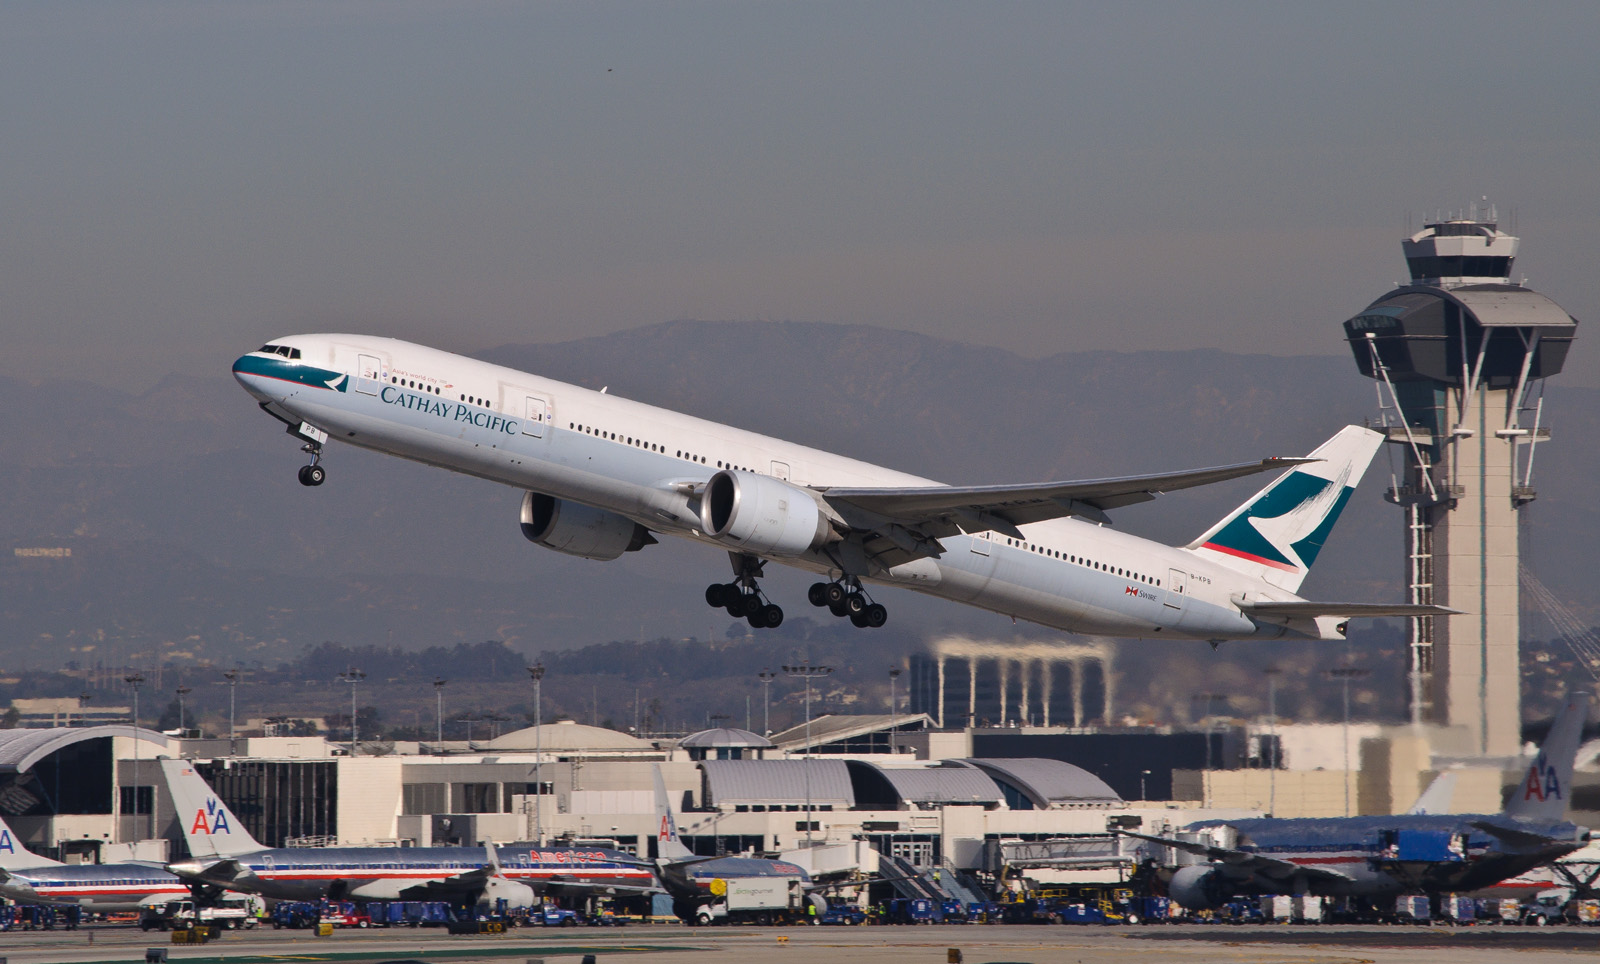 A Cathay Pacific flight takes off for Hong Kong from LAX in 2013. Photo via Flickr/InSapphoWeTrust.